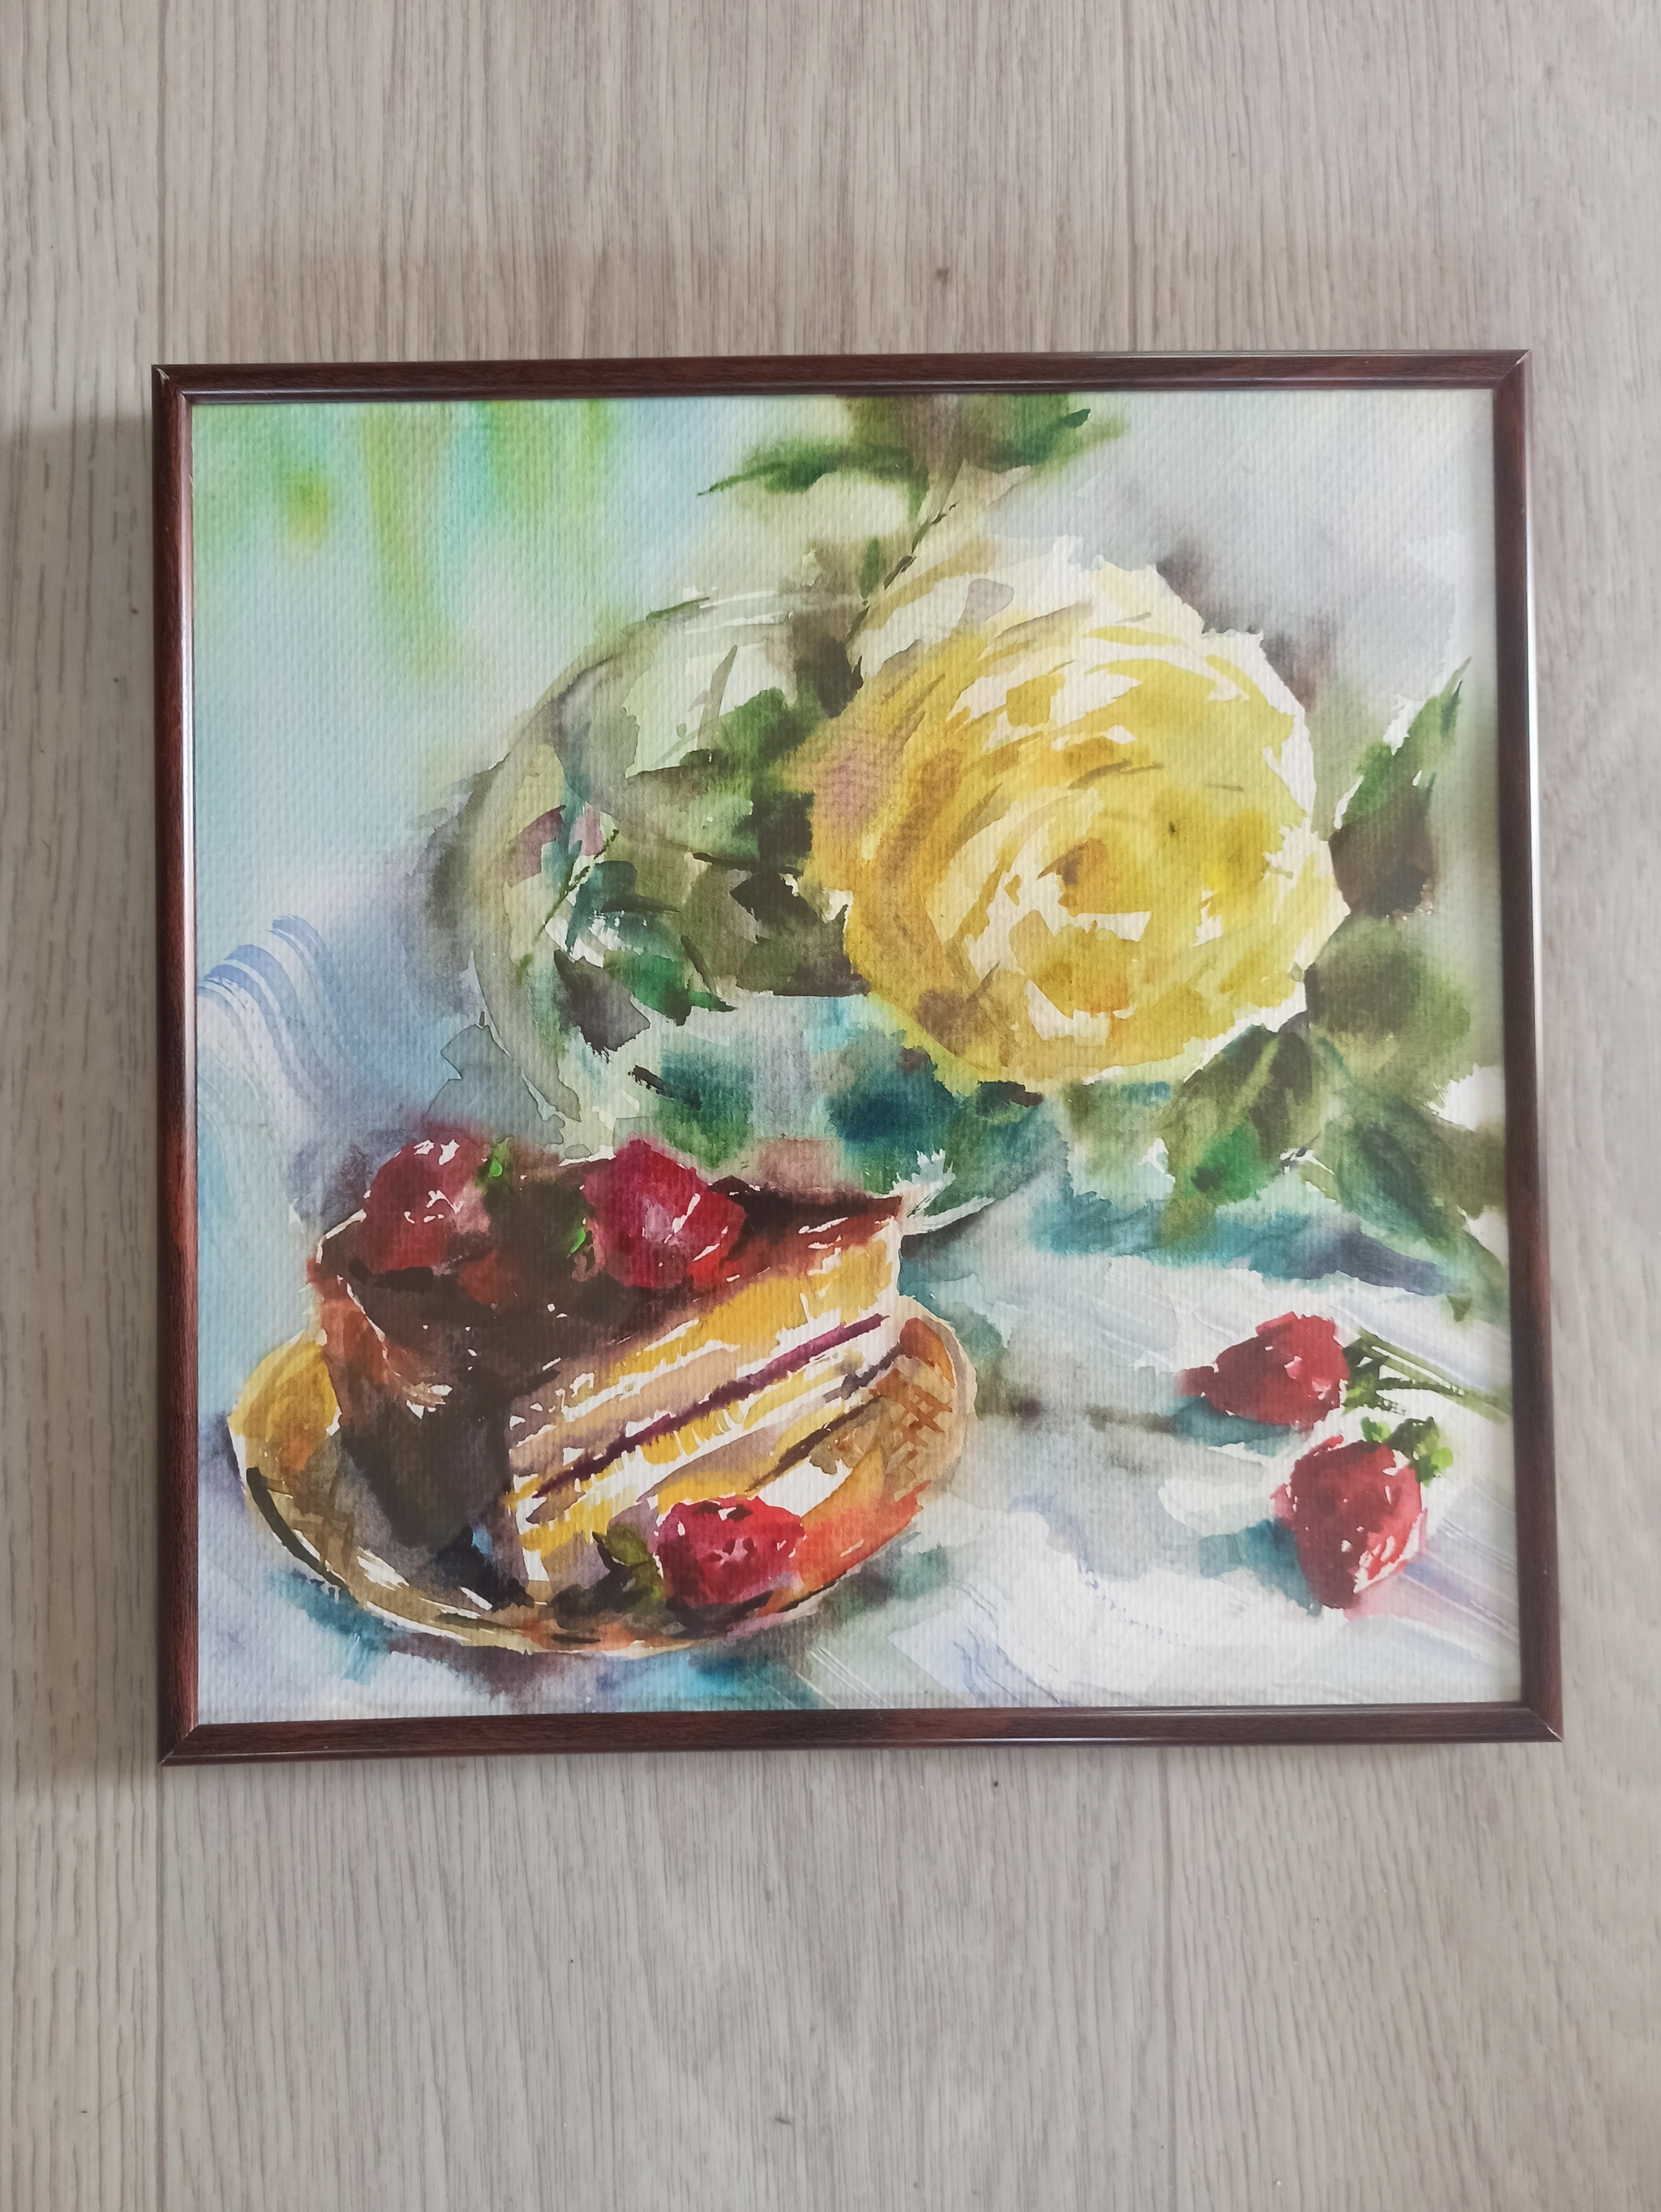 Small sketch with a cake - My, Watercolor, Etude, Cake, Joy, the Rose